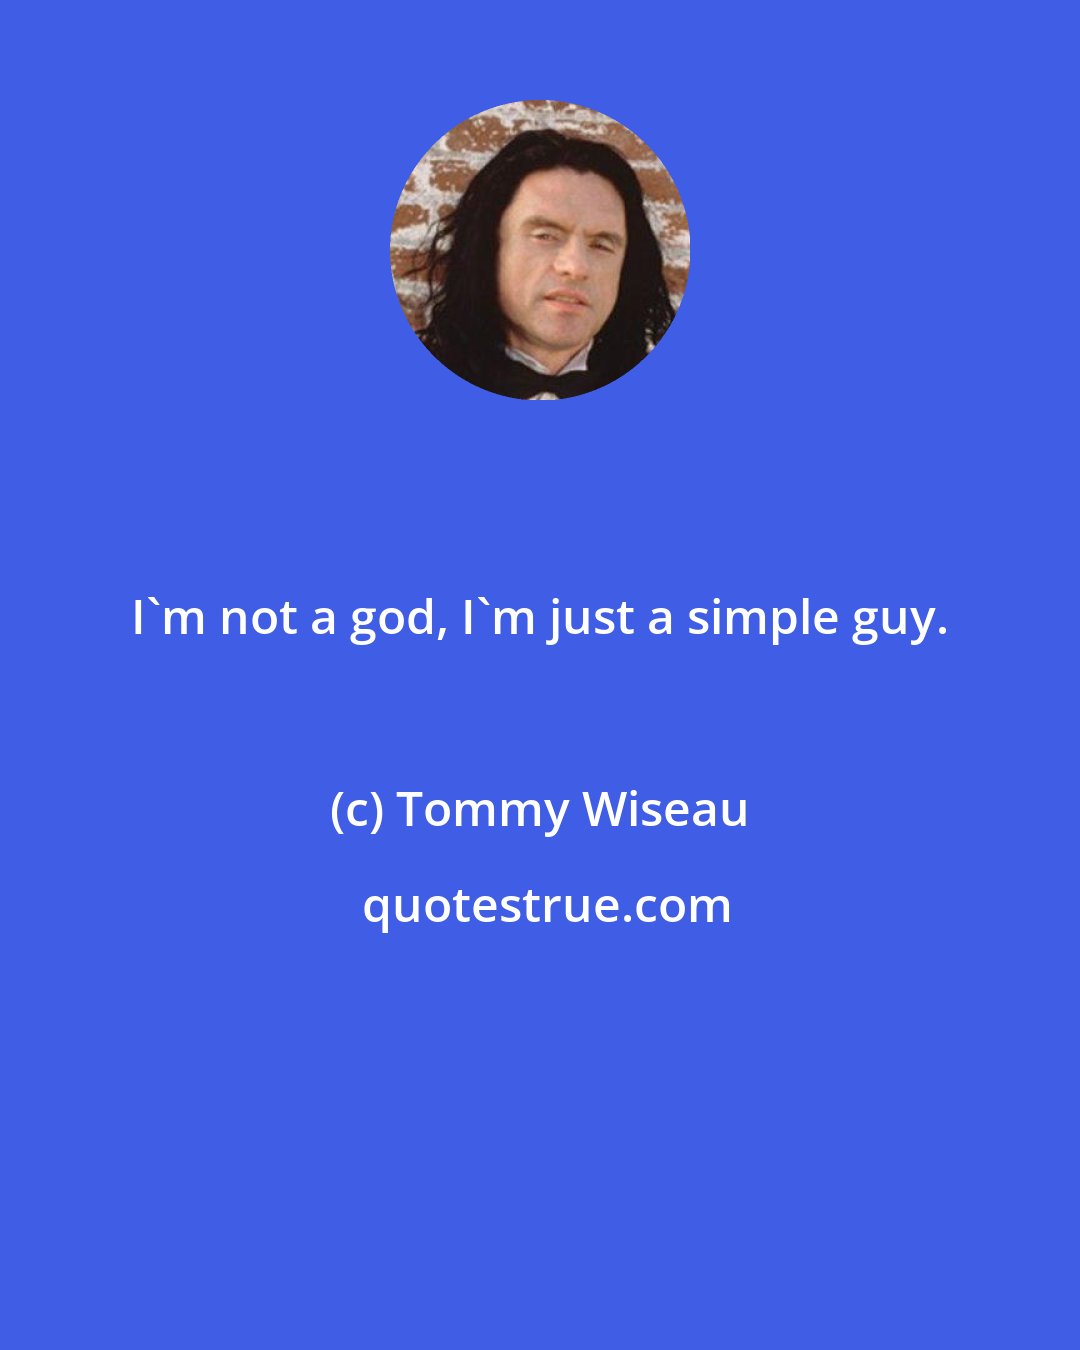 Tommy Wiseau: I'm not a god, I'm just a simple guy.